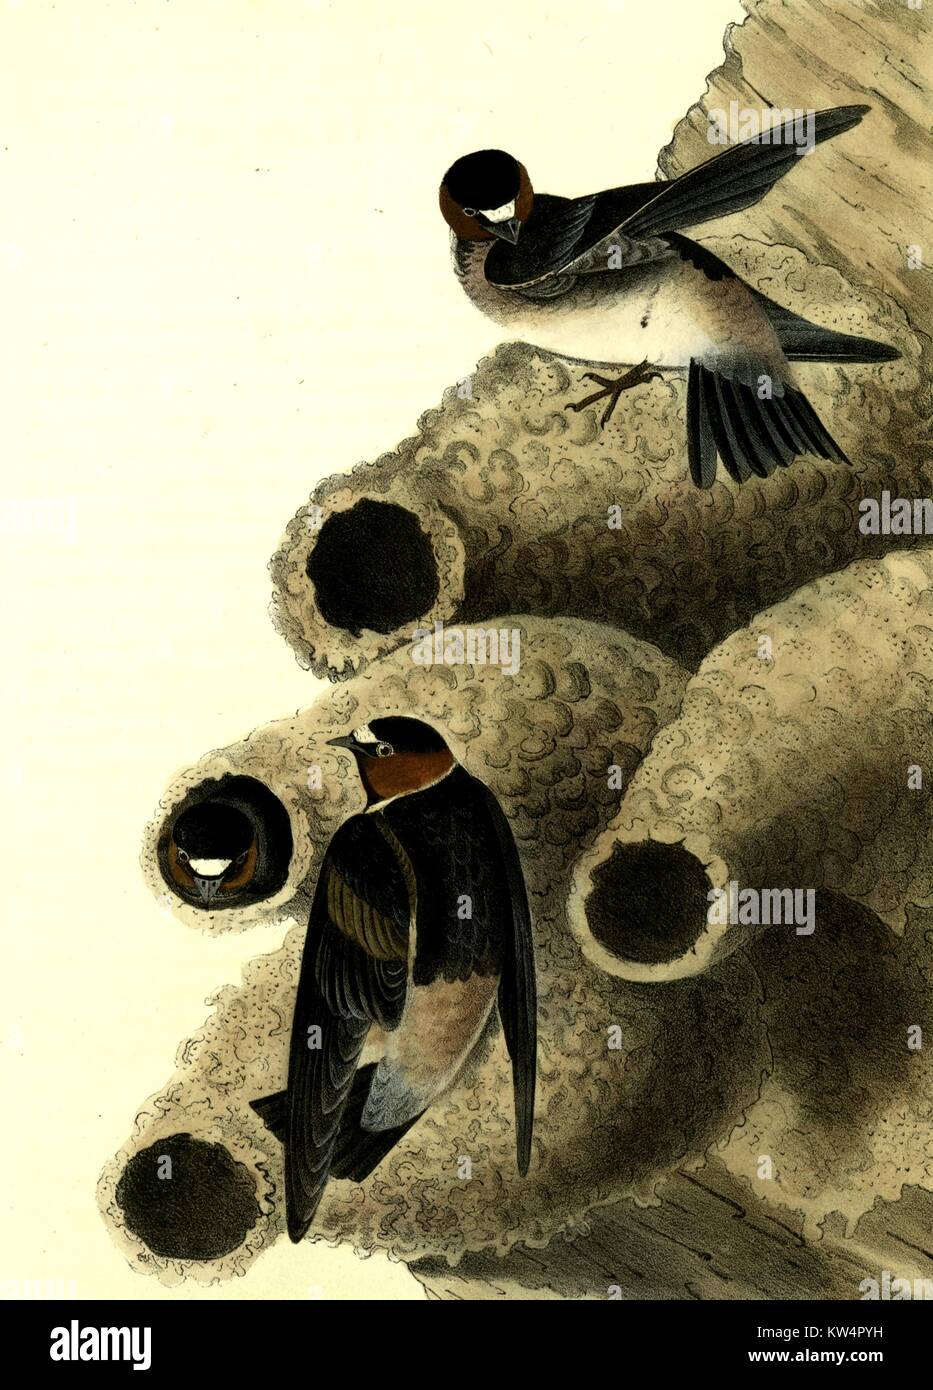 Illustration of a cliff swallow from the book Birds of America by John James Audubon, 1842. From the New York Public Library. Stock Photo